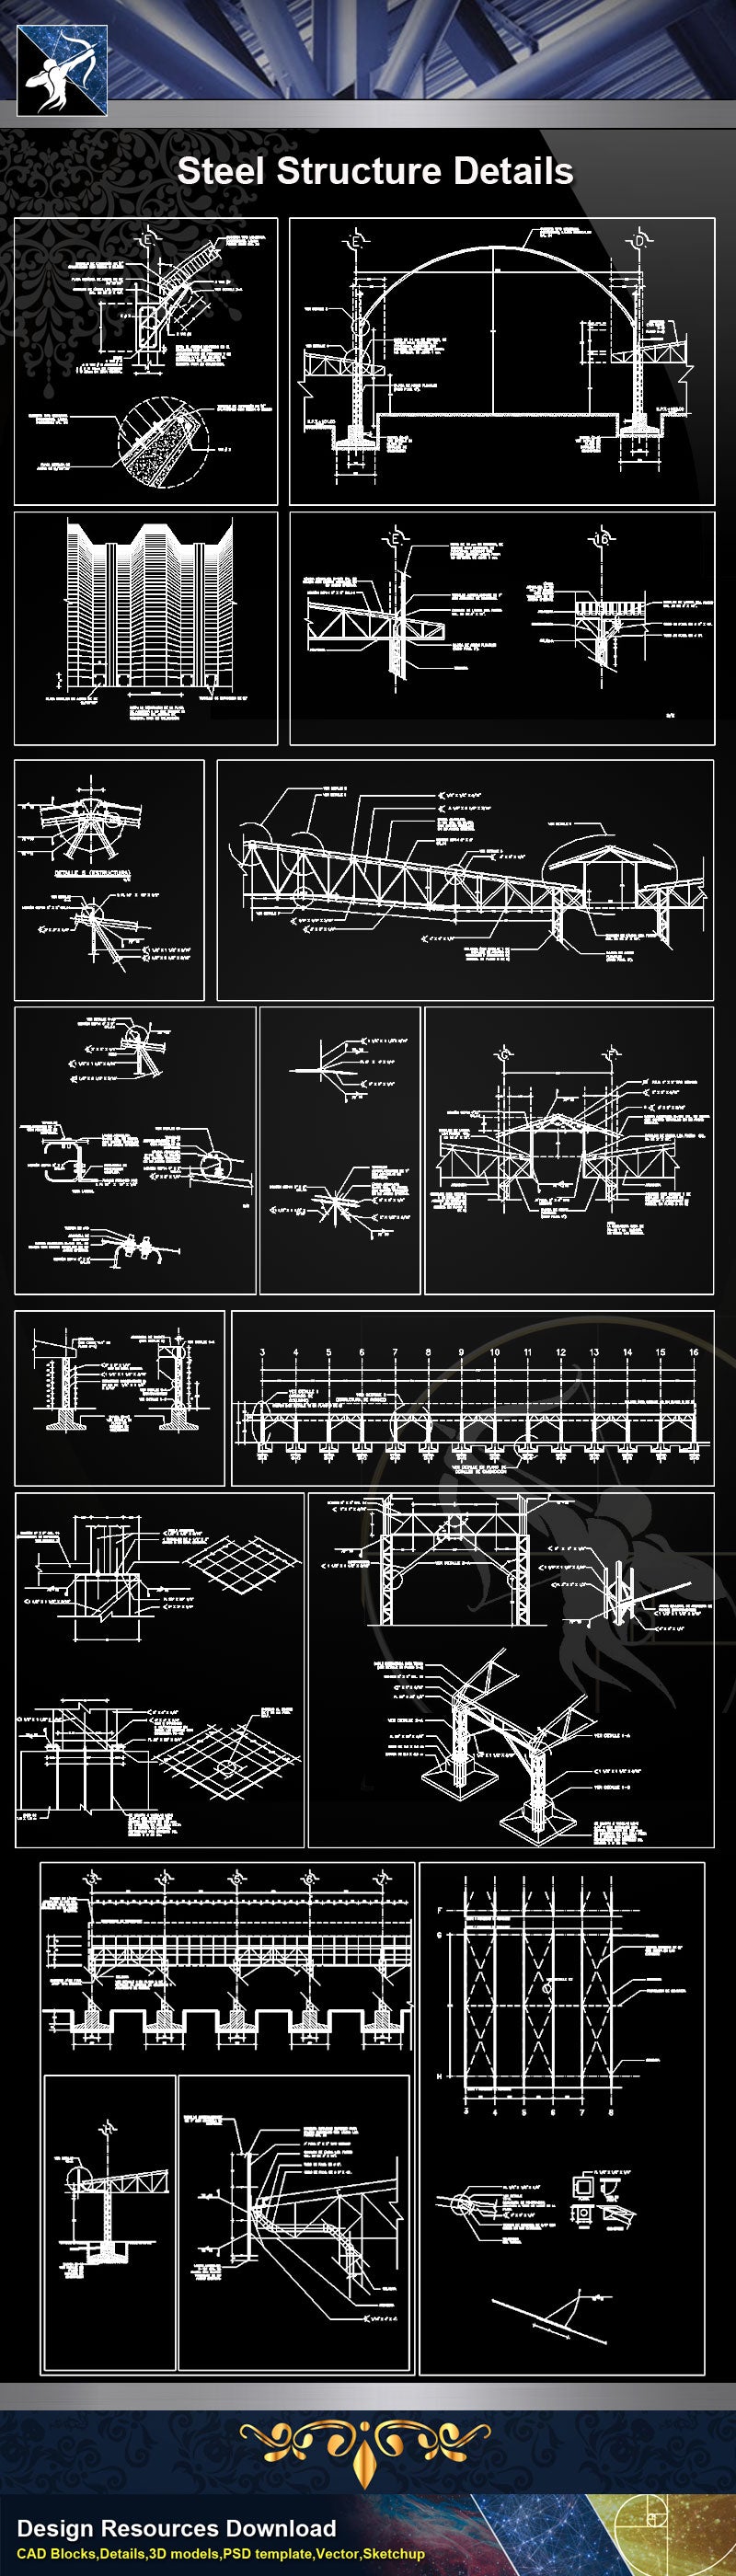 ★【Steel Structure Details】Steel Structure Details Collection V.6